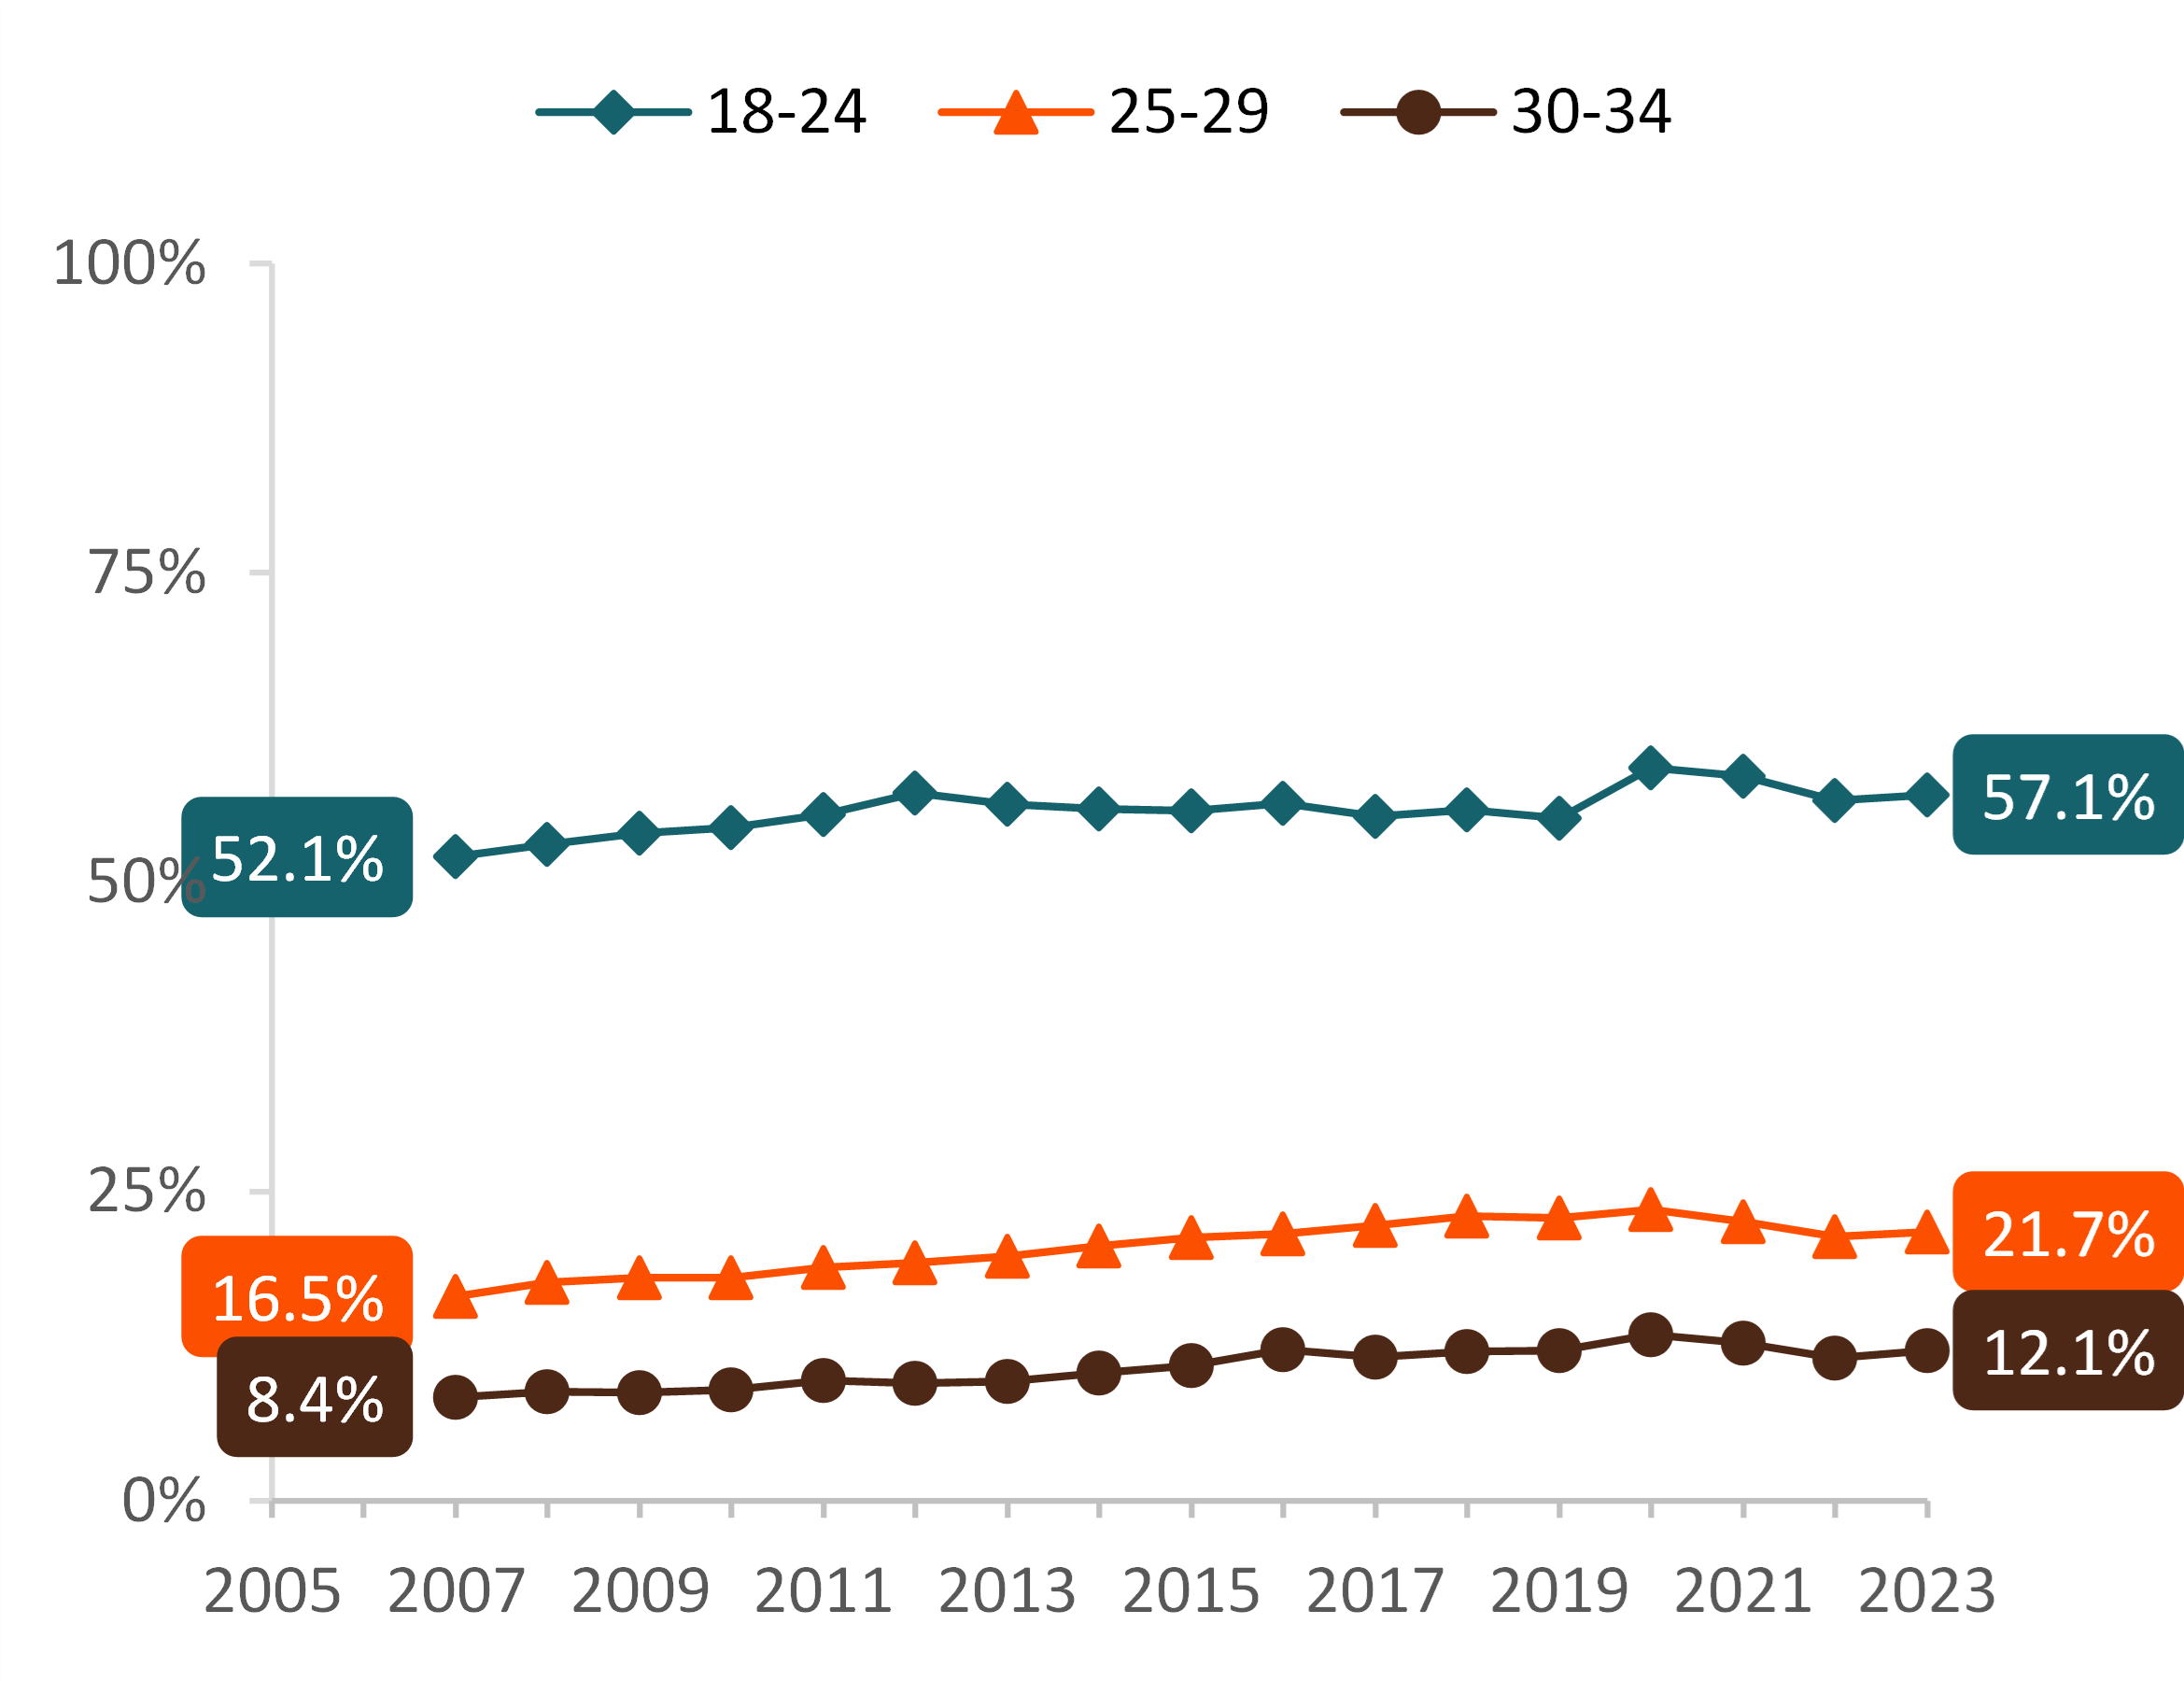 Figure 1. Share of Young Adults Living in the Parental Home by Age Group, 2007-2023